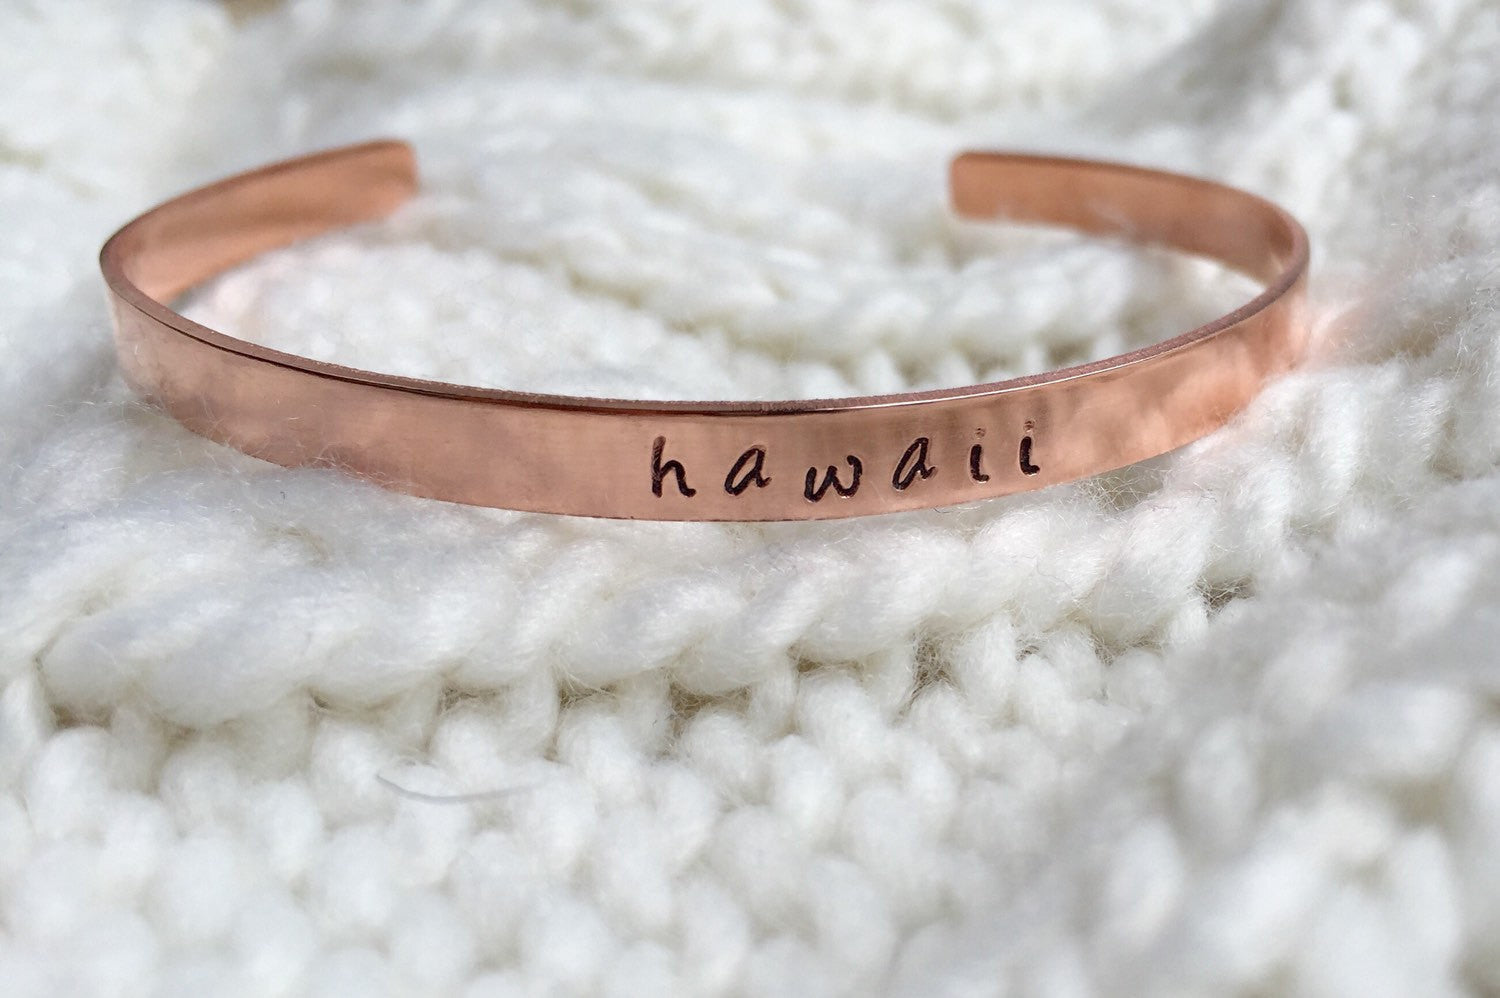 Personalized Cuffs, Hawaiian Jewelry, Aloha Bracelet, Hawaii Bracelet, Ku'uipo Bracelet, Ohana Bracelet, Skinny Cuff - Natashaaloha, jewelry, bracelets, necklace, keychains, fishing lures, gifts for men, charms, personalized, 